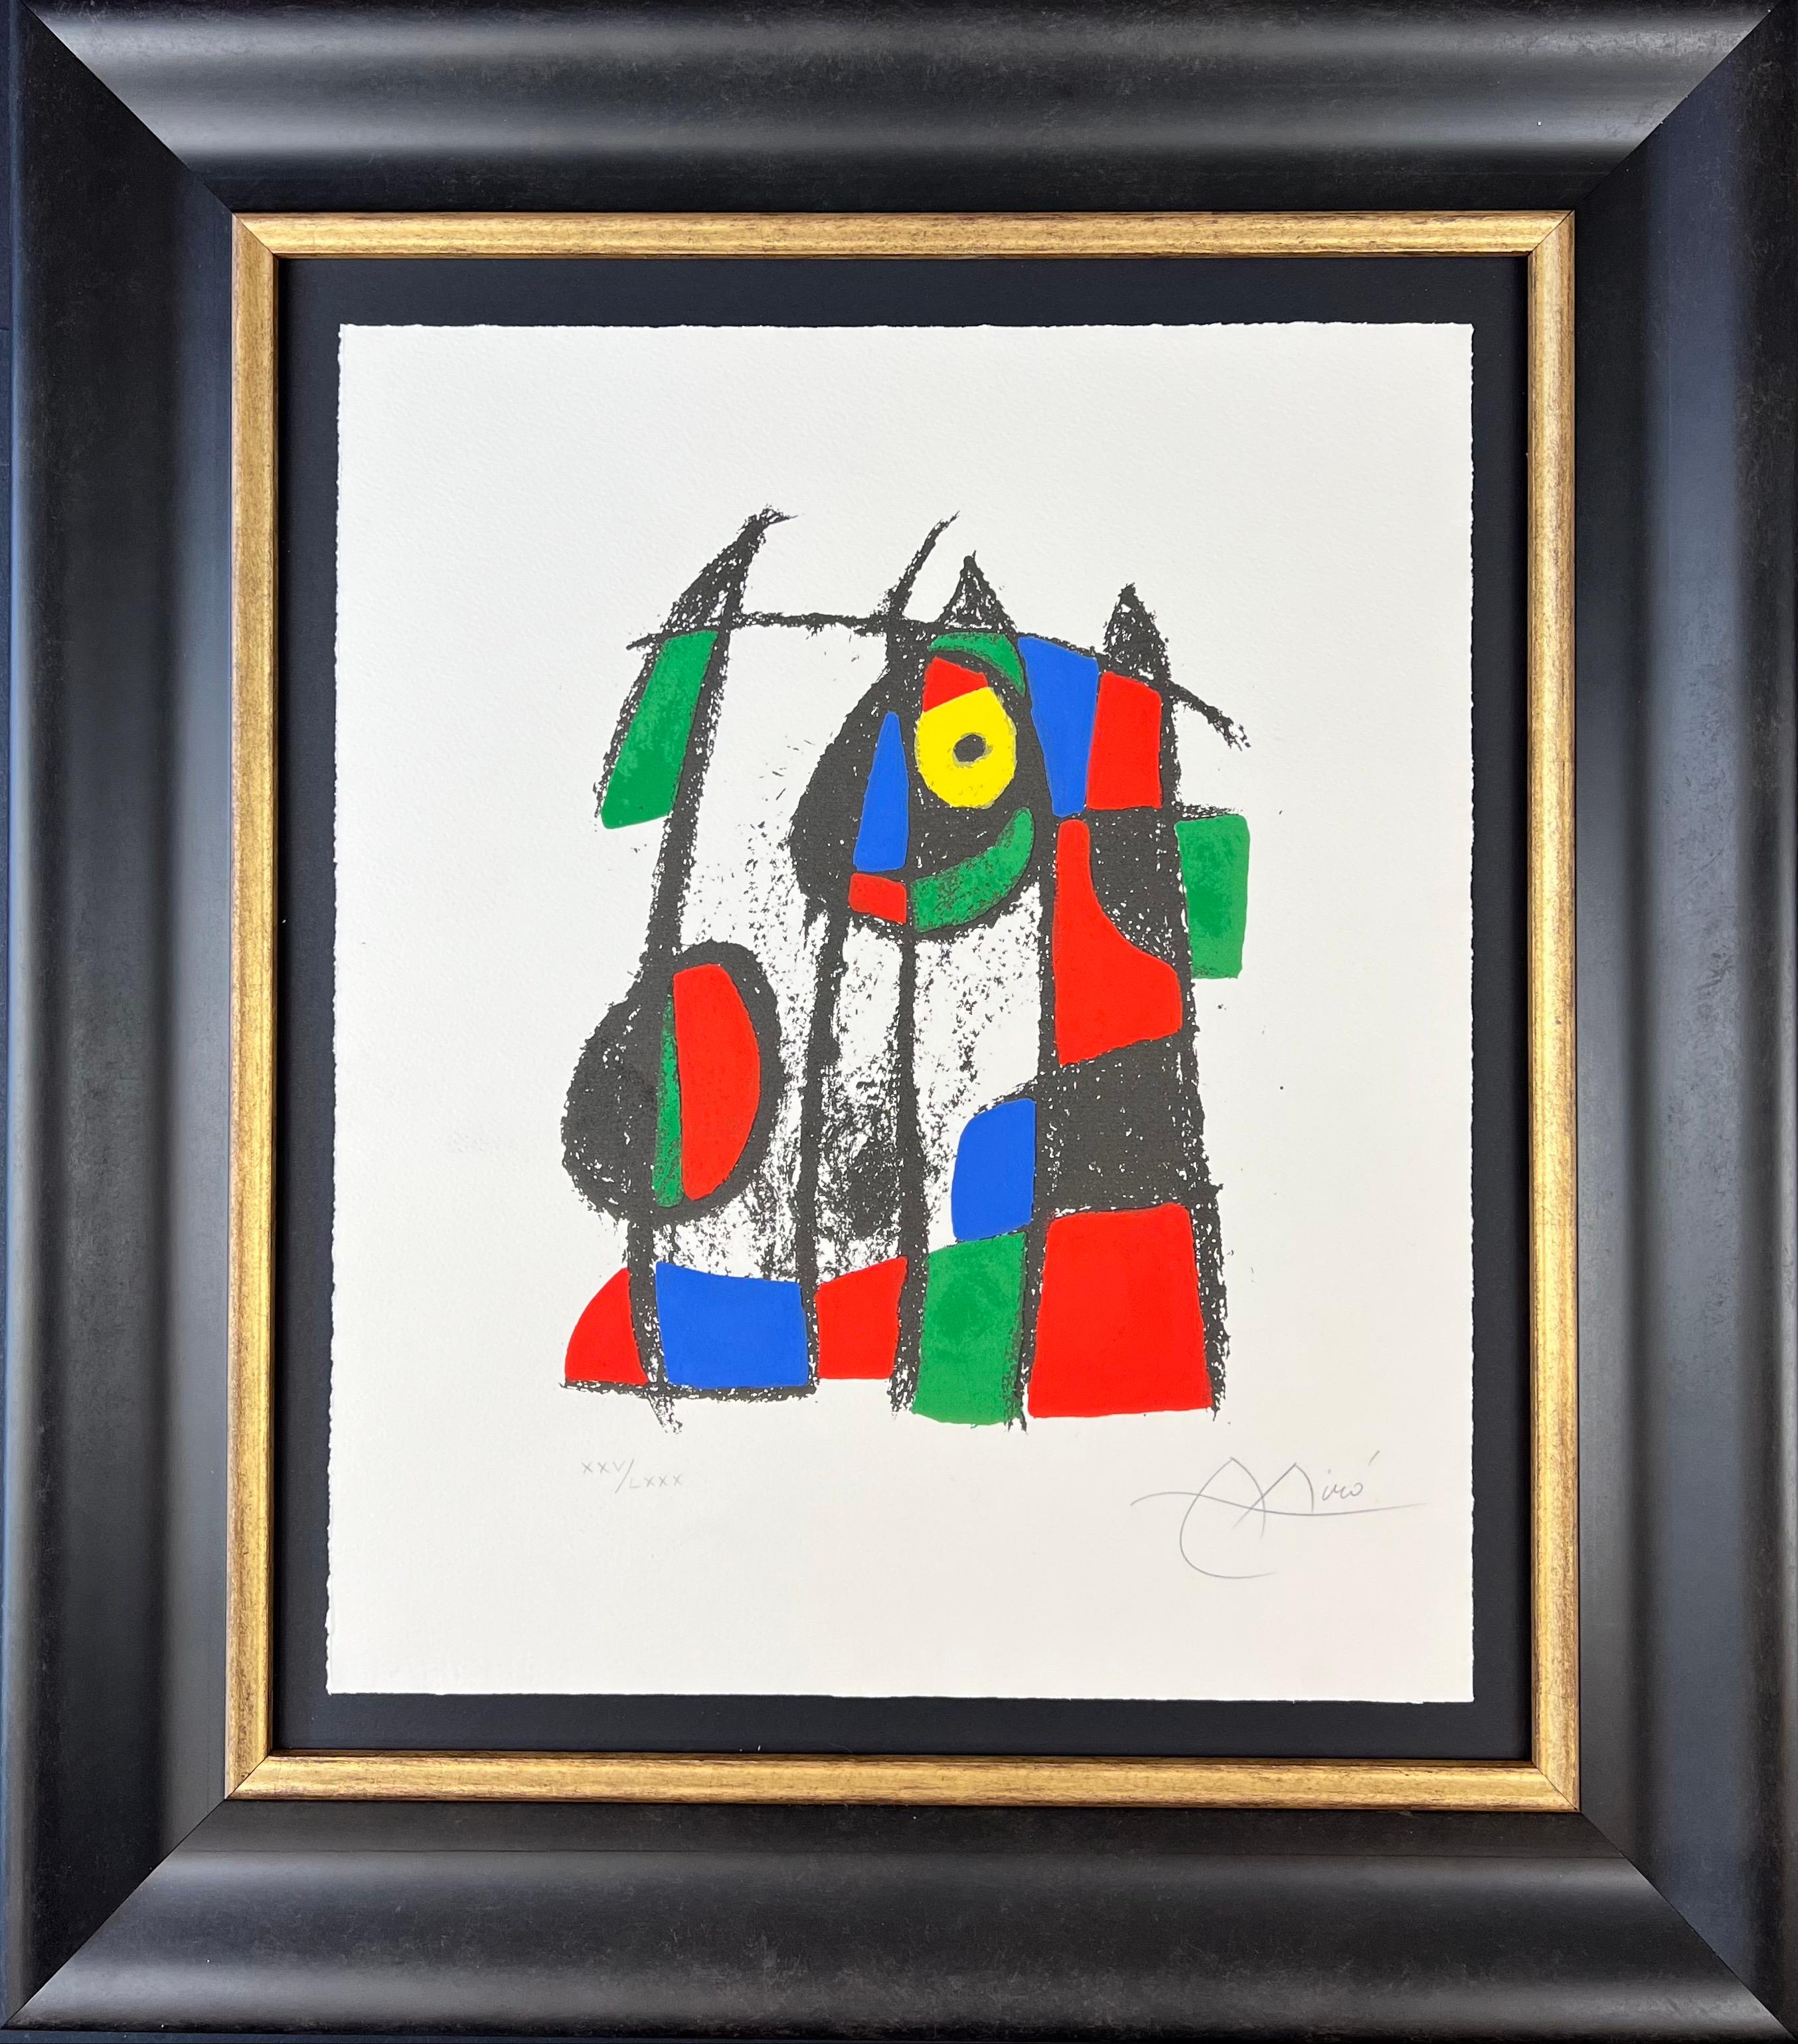 Color lithograph on Arches paper, edited in 1975
Limited edition
signed in pencil by artist in lower right corner and numbered XXV/LXXX in lower left corner
Framed size: 64,5 x 56,5 cm
Paper size: : 44,5 x 37 cm
Excellent conditions , with strong